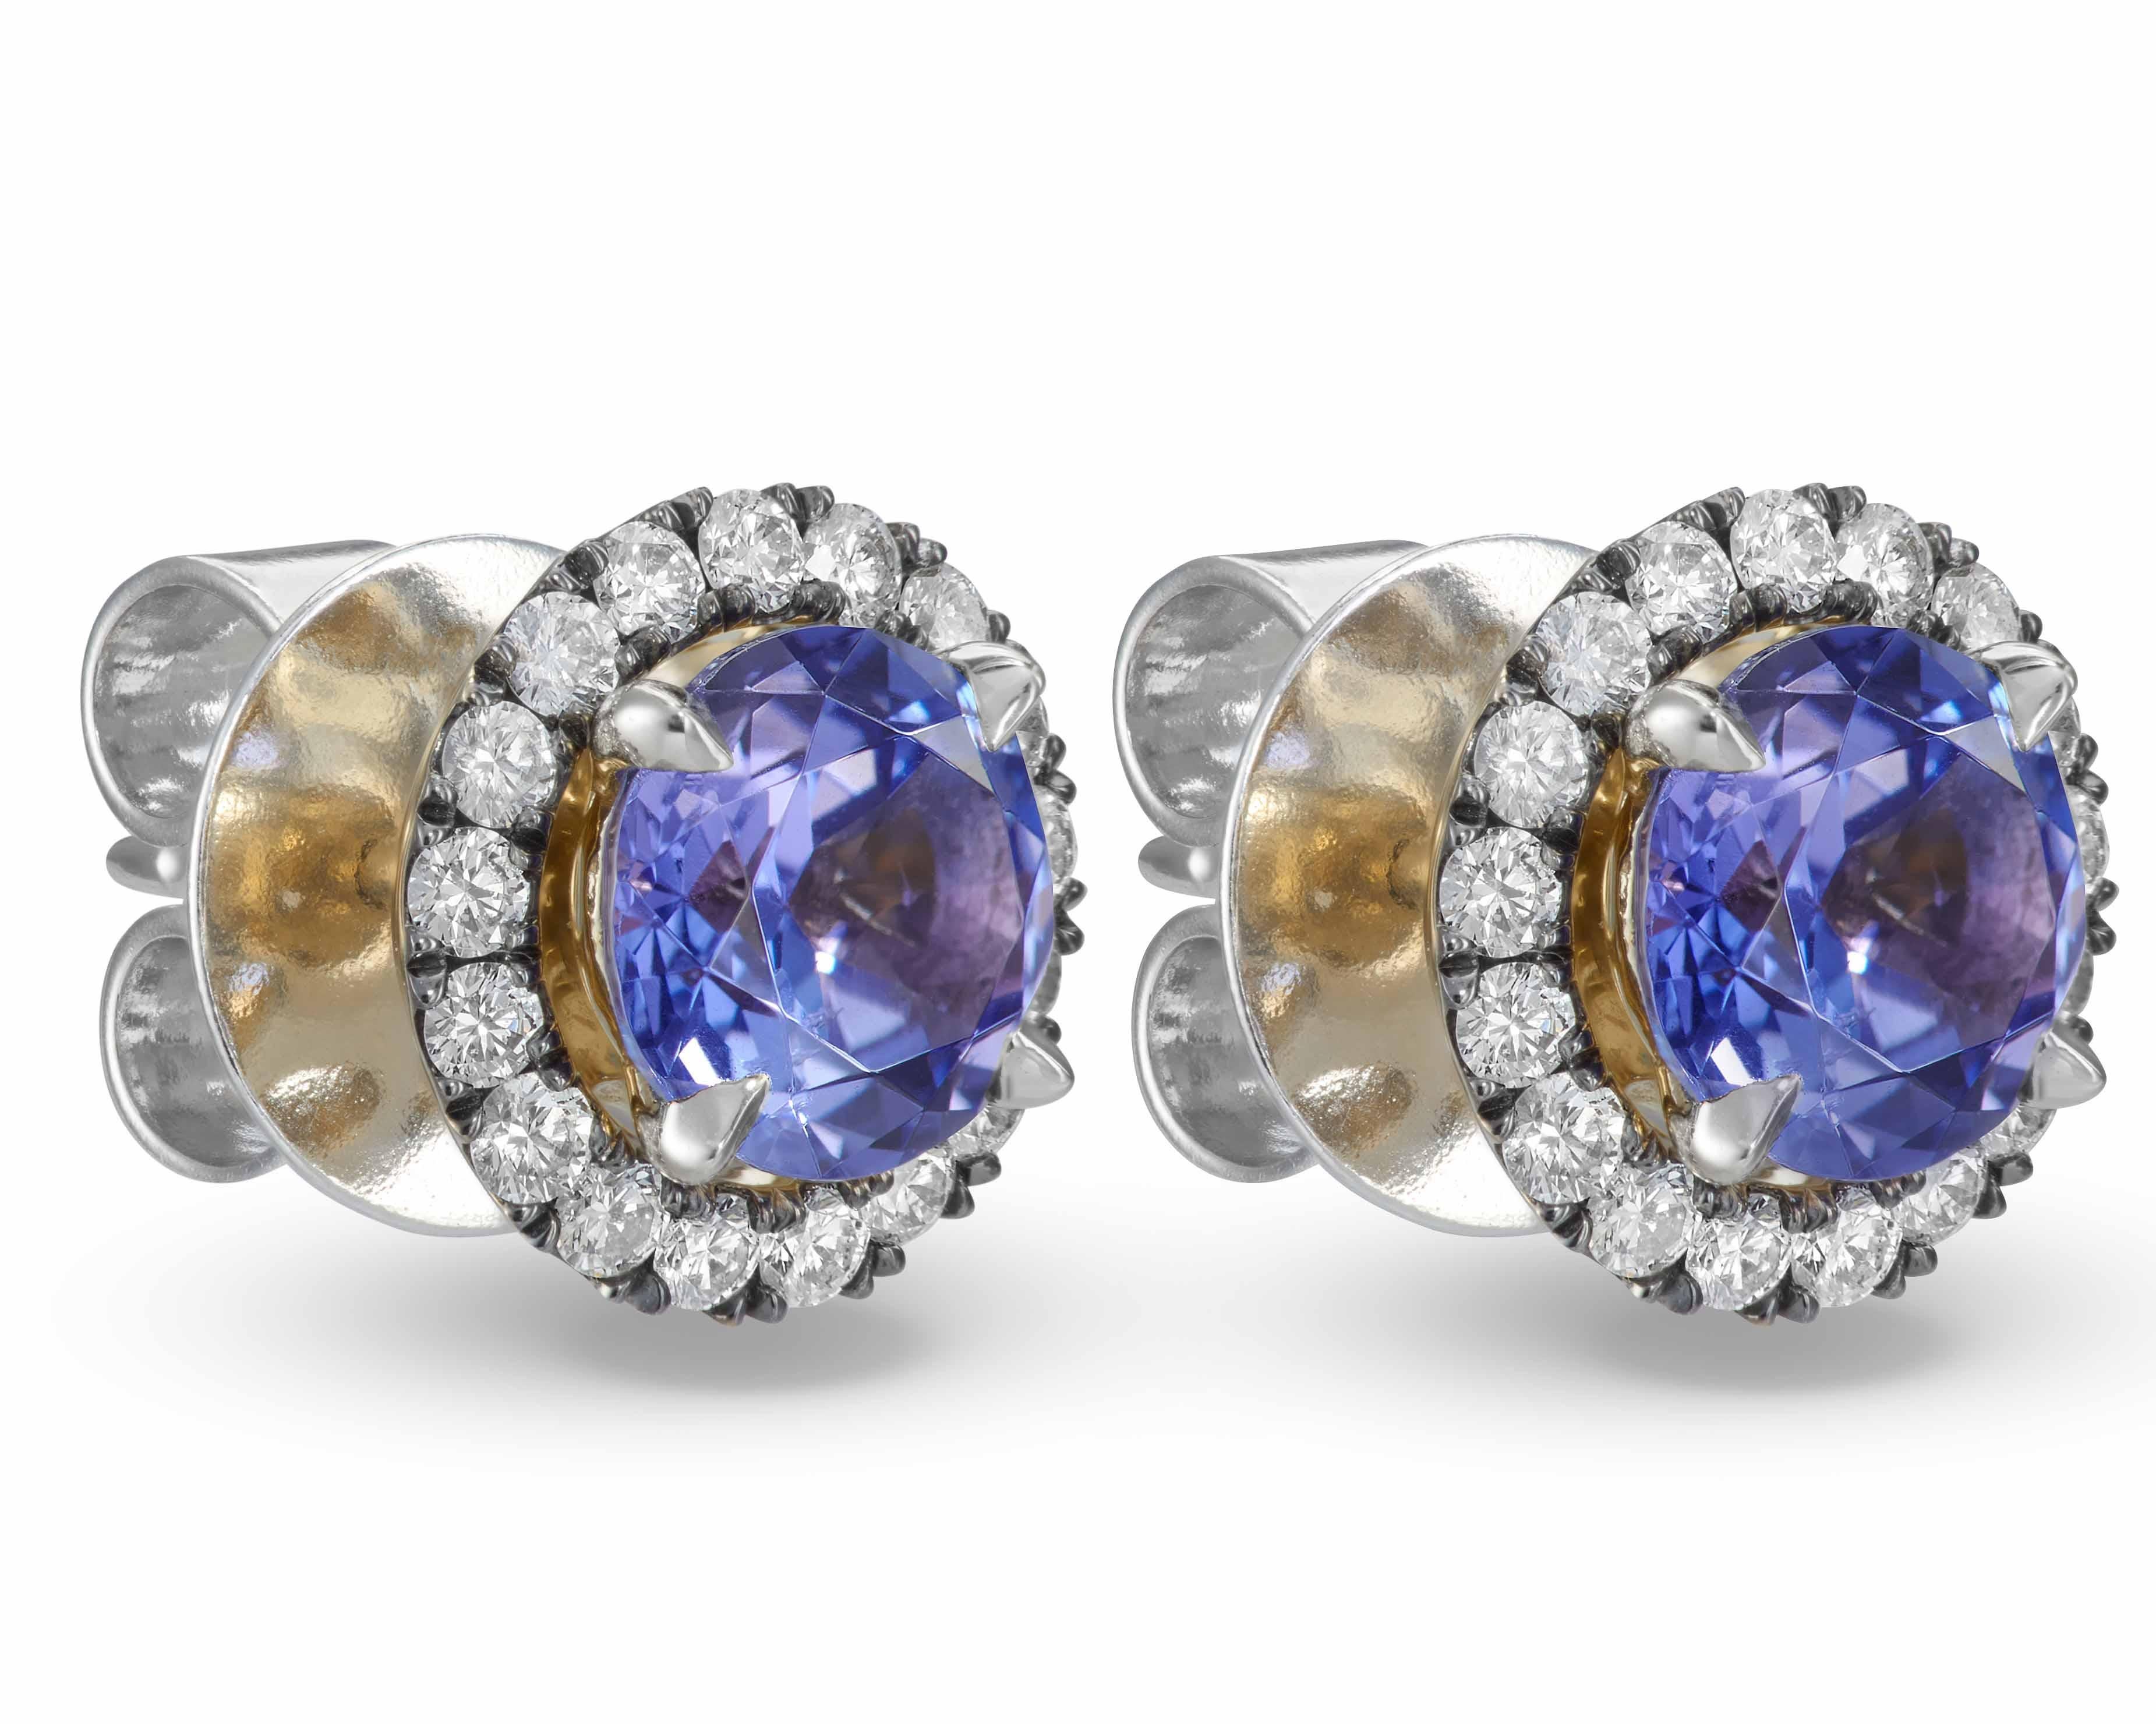 These 2.18ct tanzanite studs are perfect for everyday wear and can be worn with or without pave diamond jackets. 
The earrings are handcrafted in natural 18K yellow gold (no rhodium plating); the jackets are pavé with 0.51ct brilliant-cut diamonds